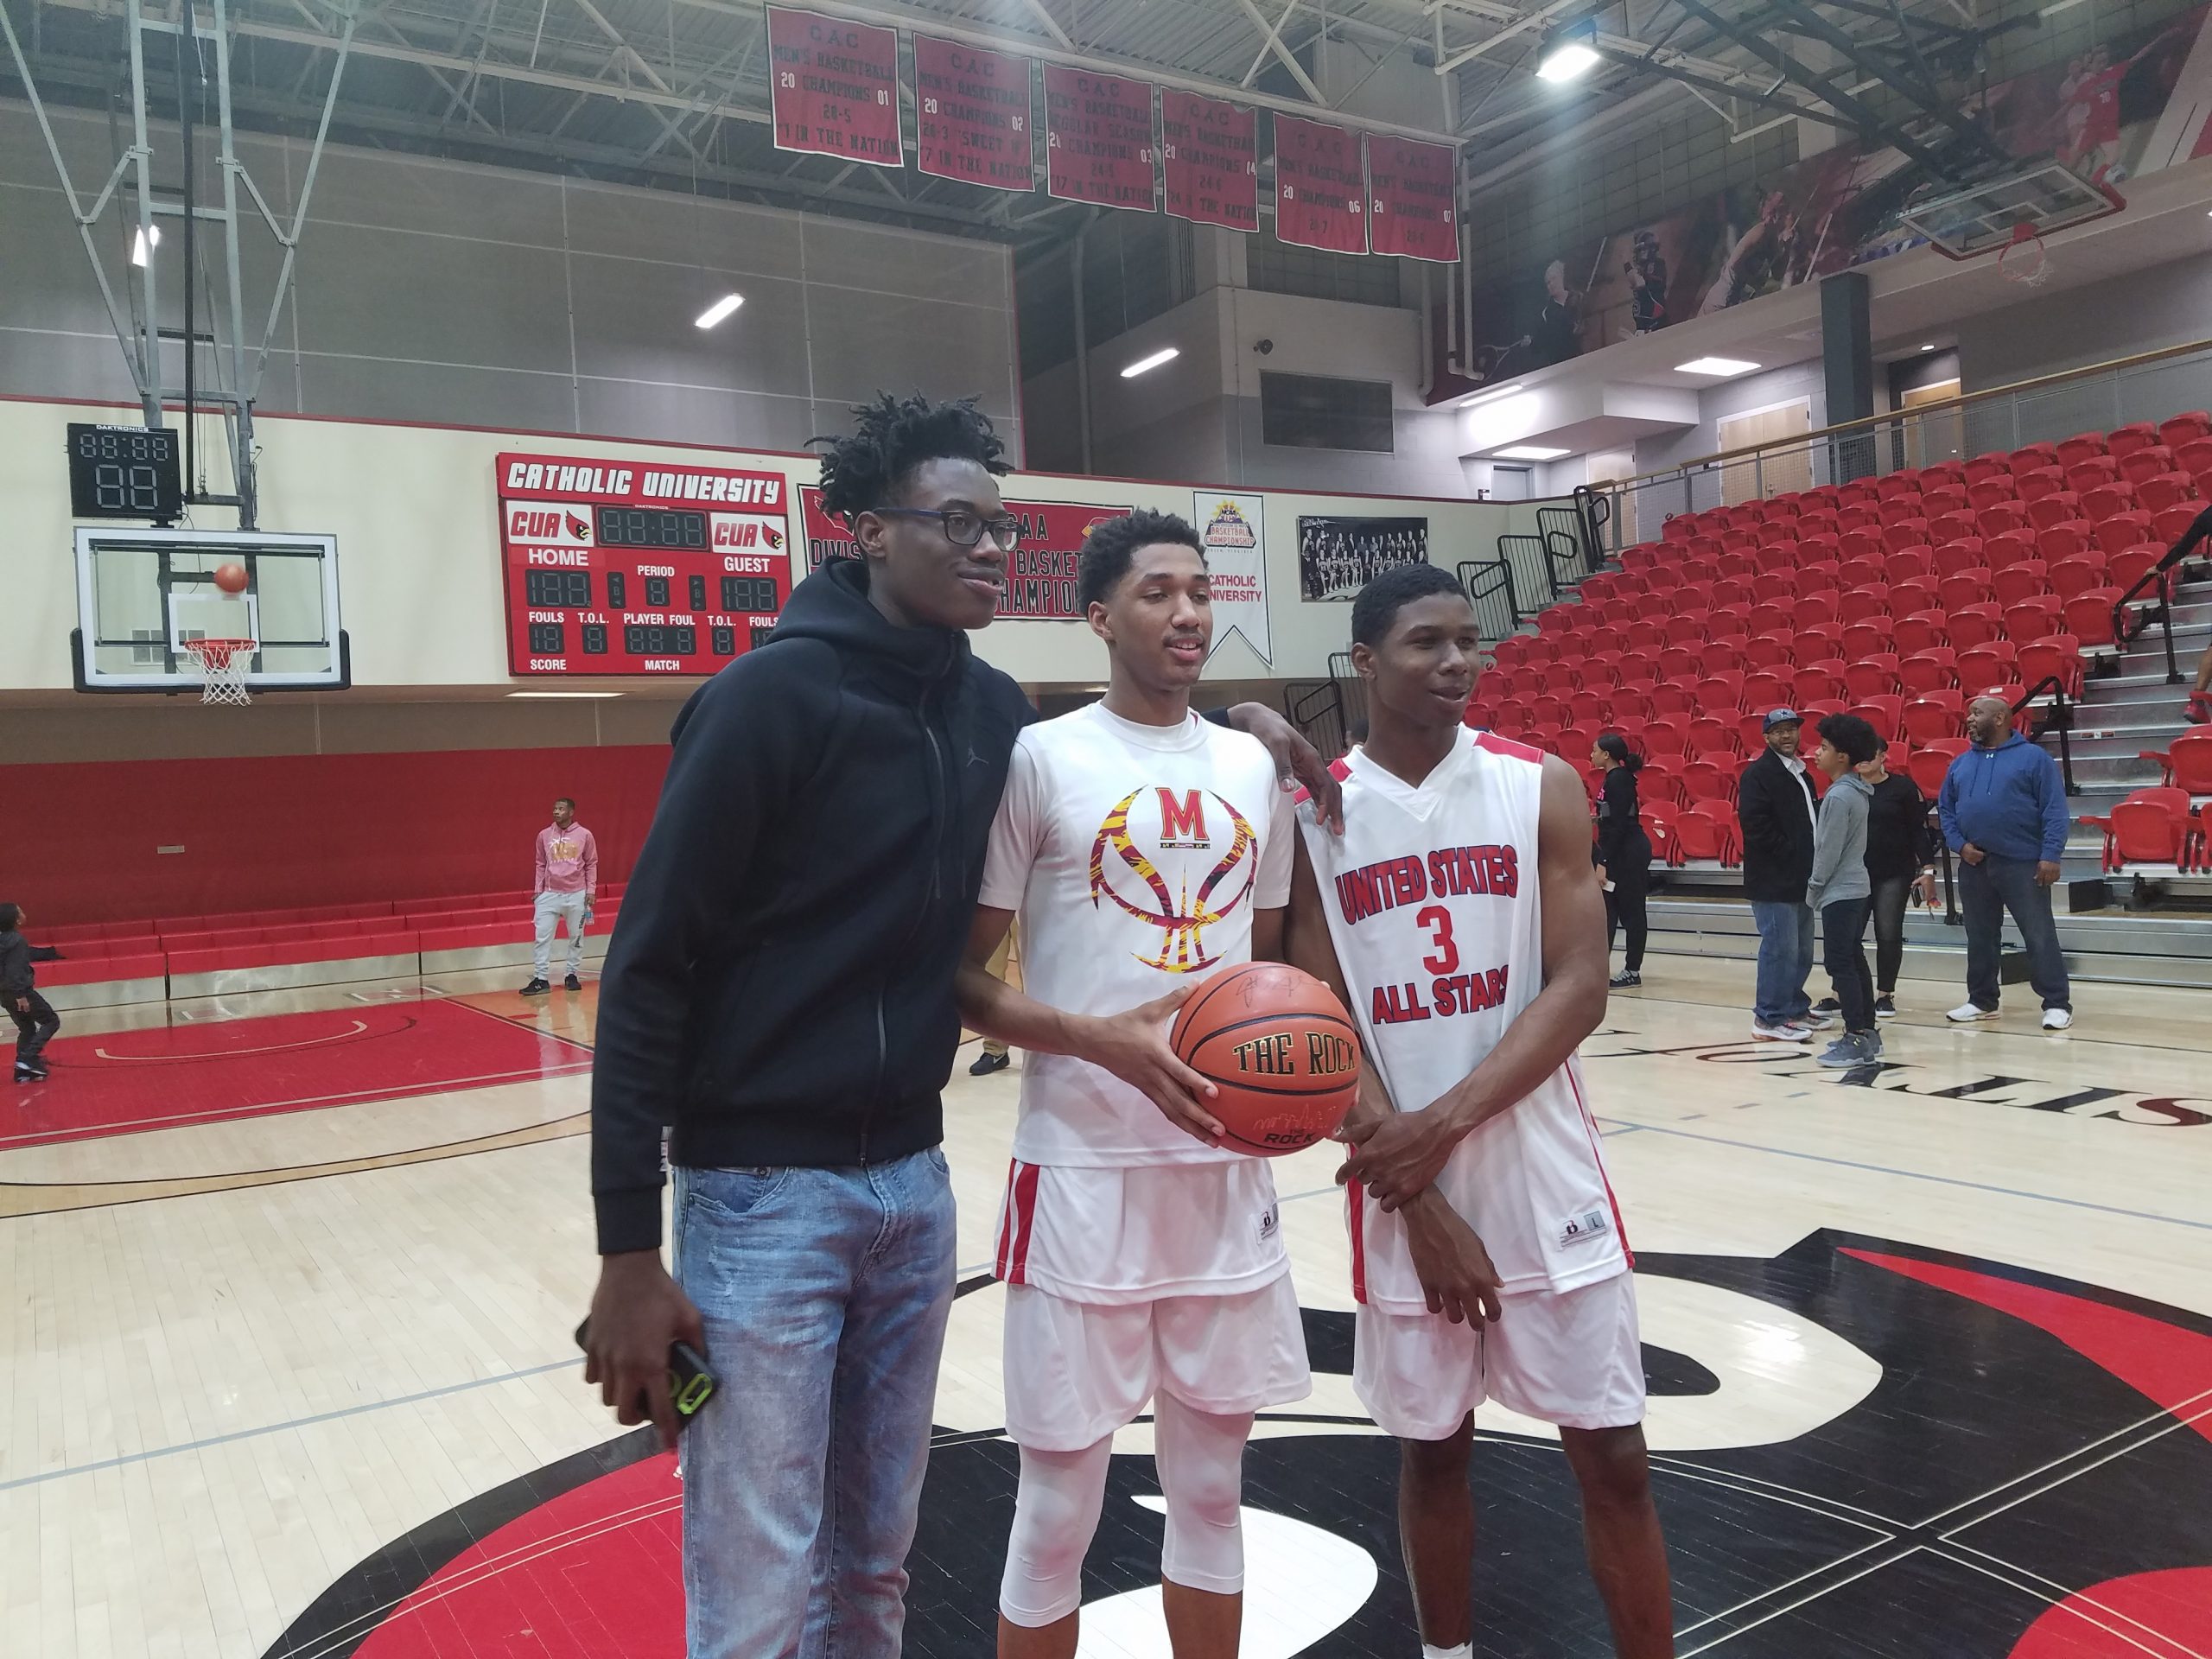 Andrew Wiggins, center, poses with fellow Maryland basketball recruits Jalen Smith, left, and Serrel Smith right, following Friday night’s Capital Classic at Catholic University